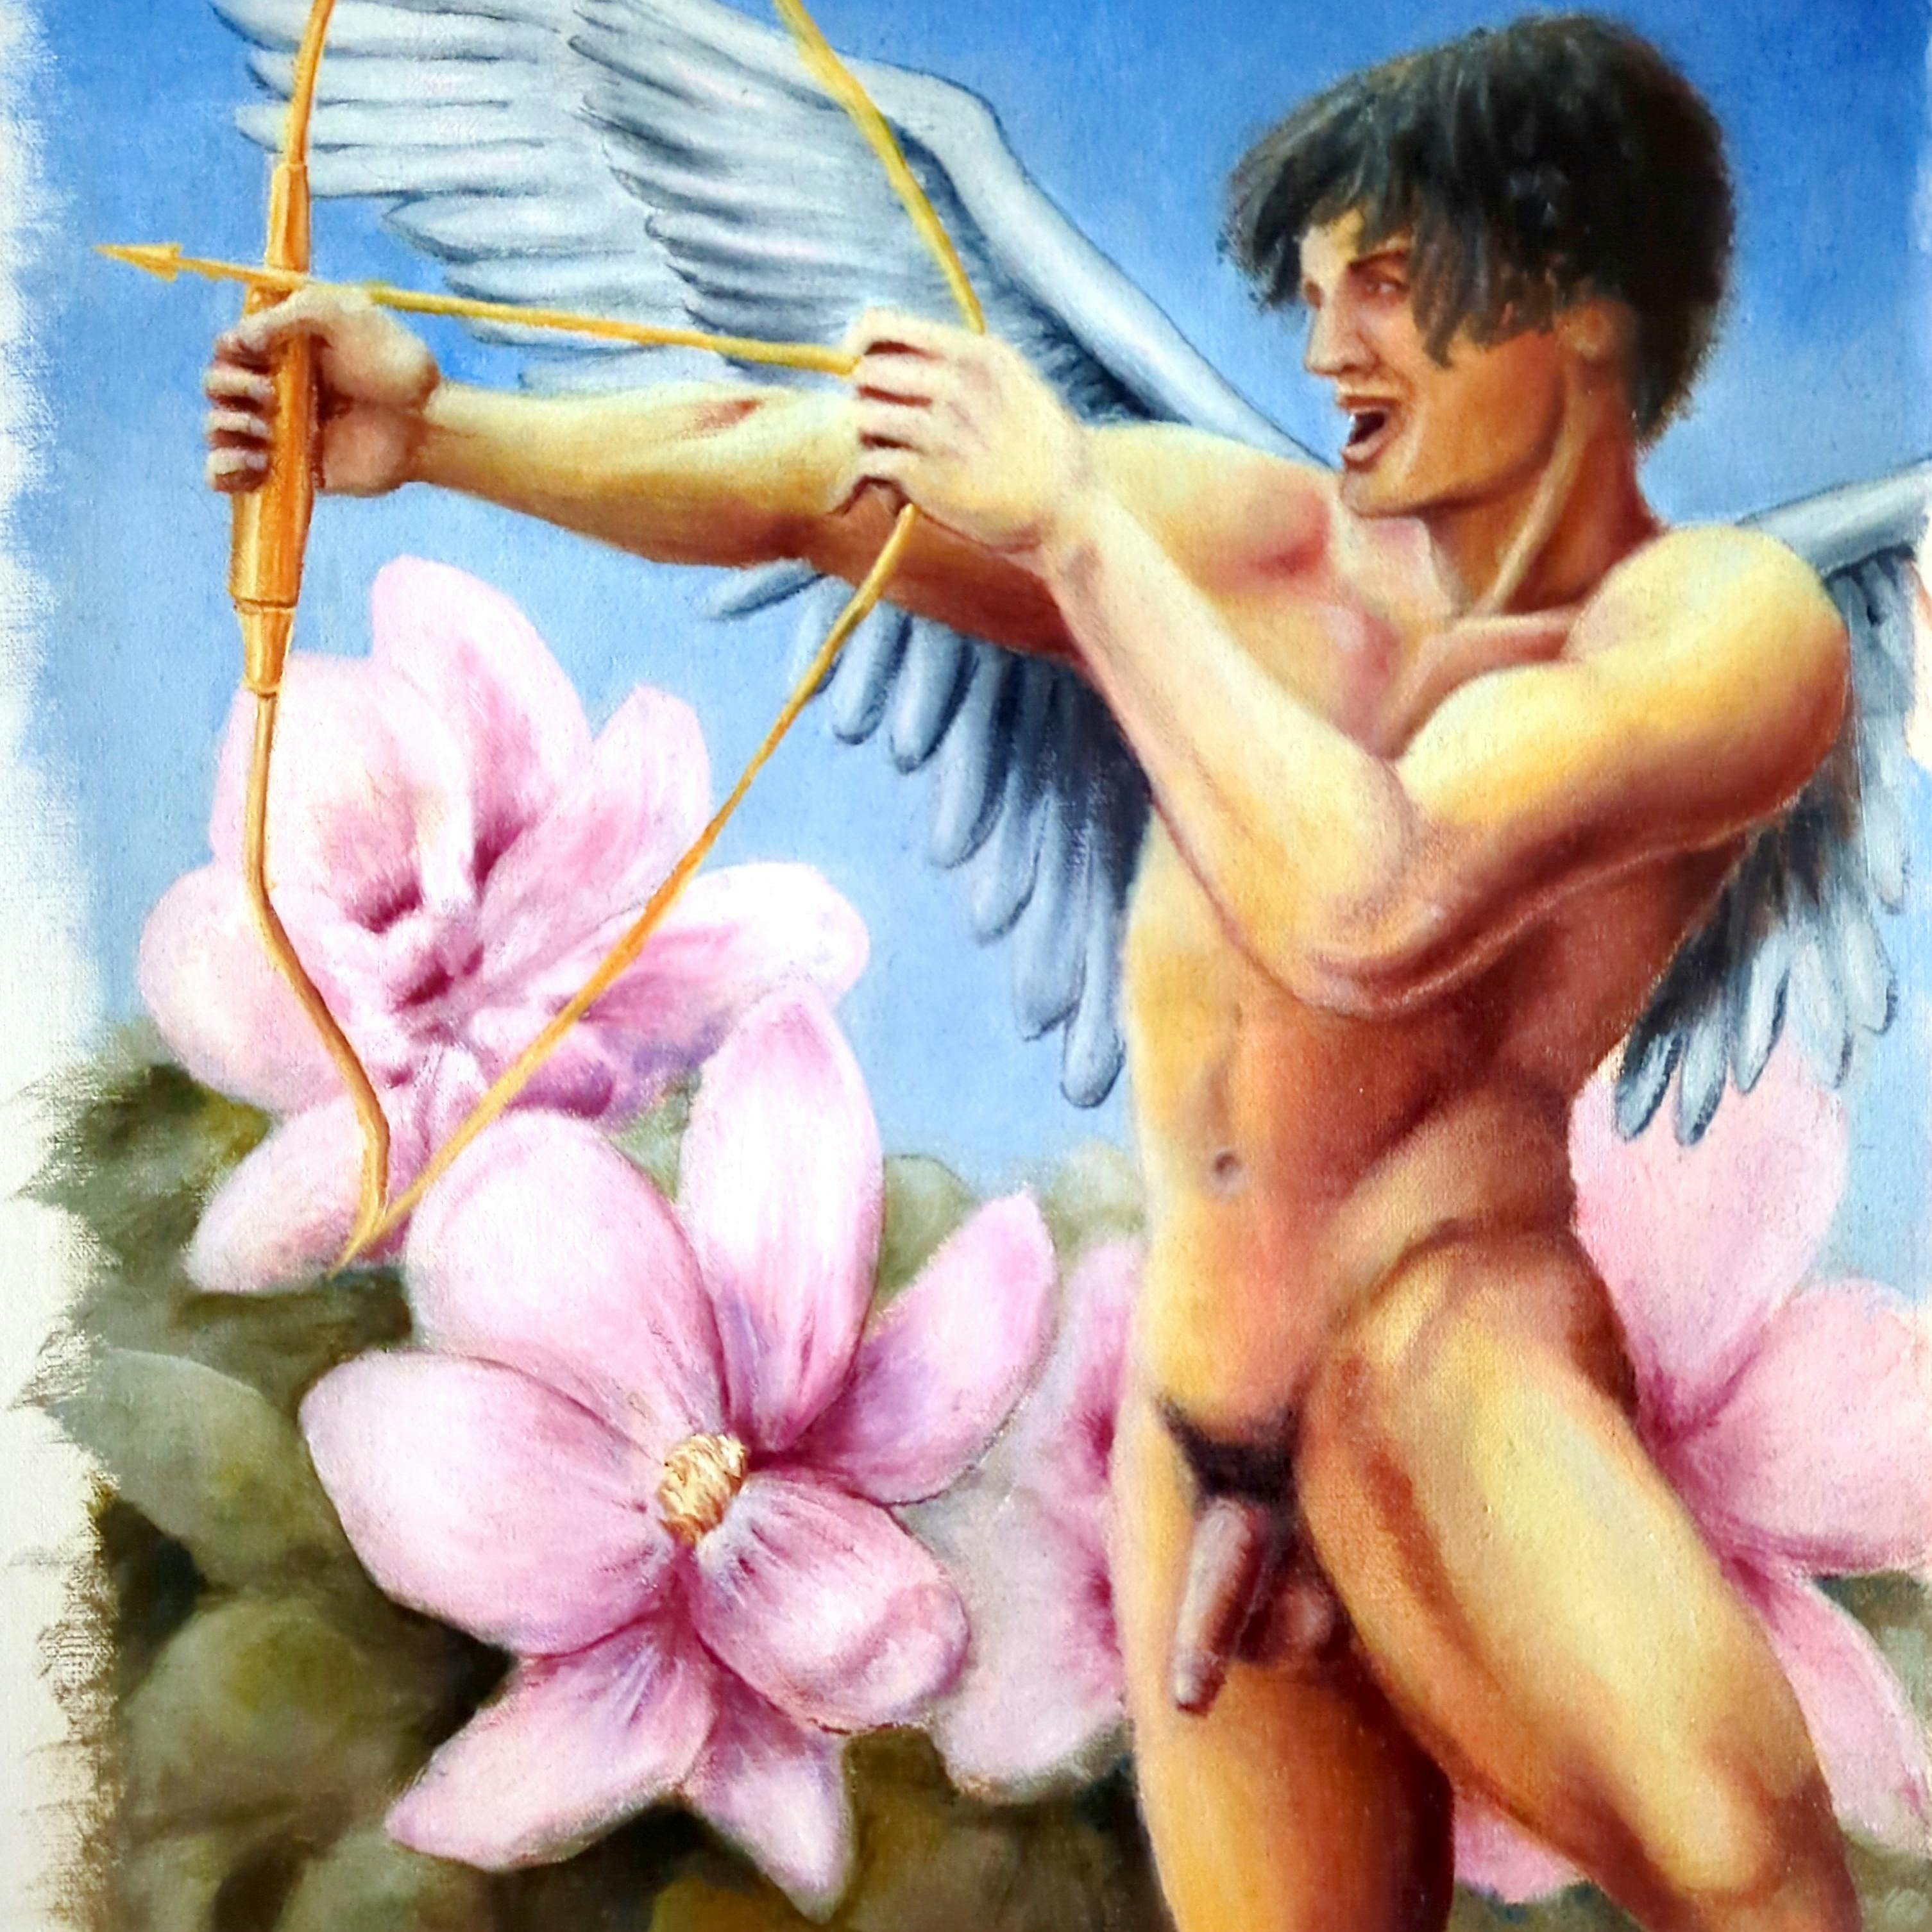 the complete painting: a muscular, nude, male angel against a pristine blue sky, graced by large magnolia blossoms. he's grinning impishly and aiming a golden bow and arrow at an unseen target